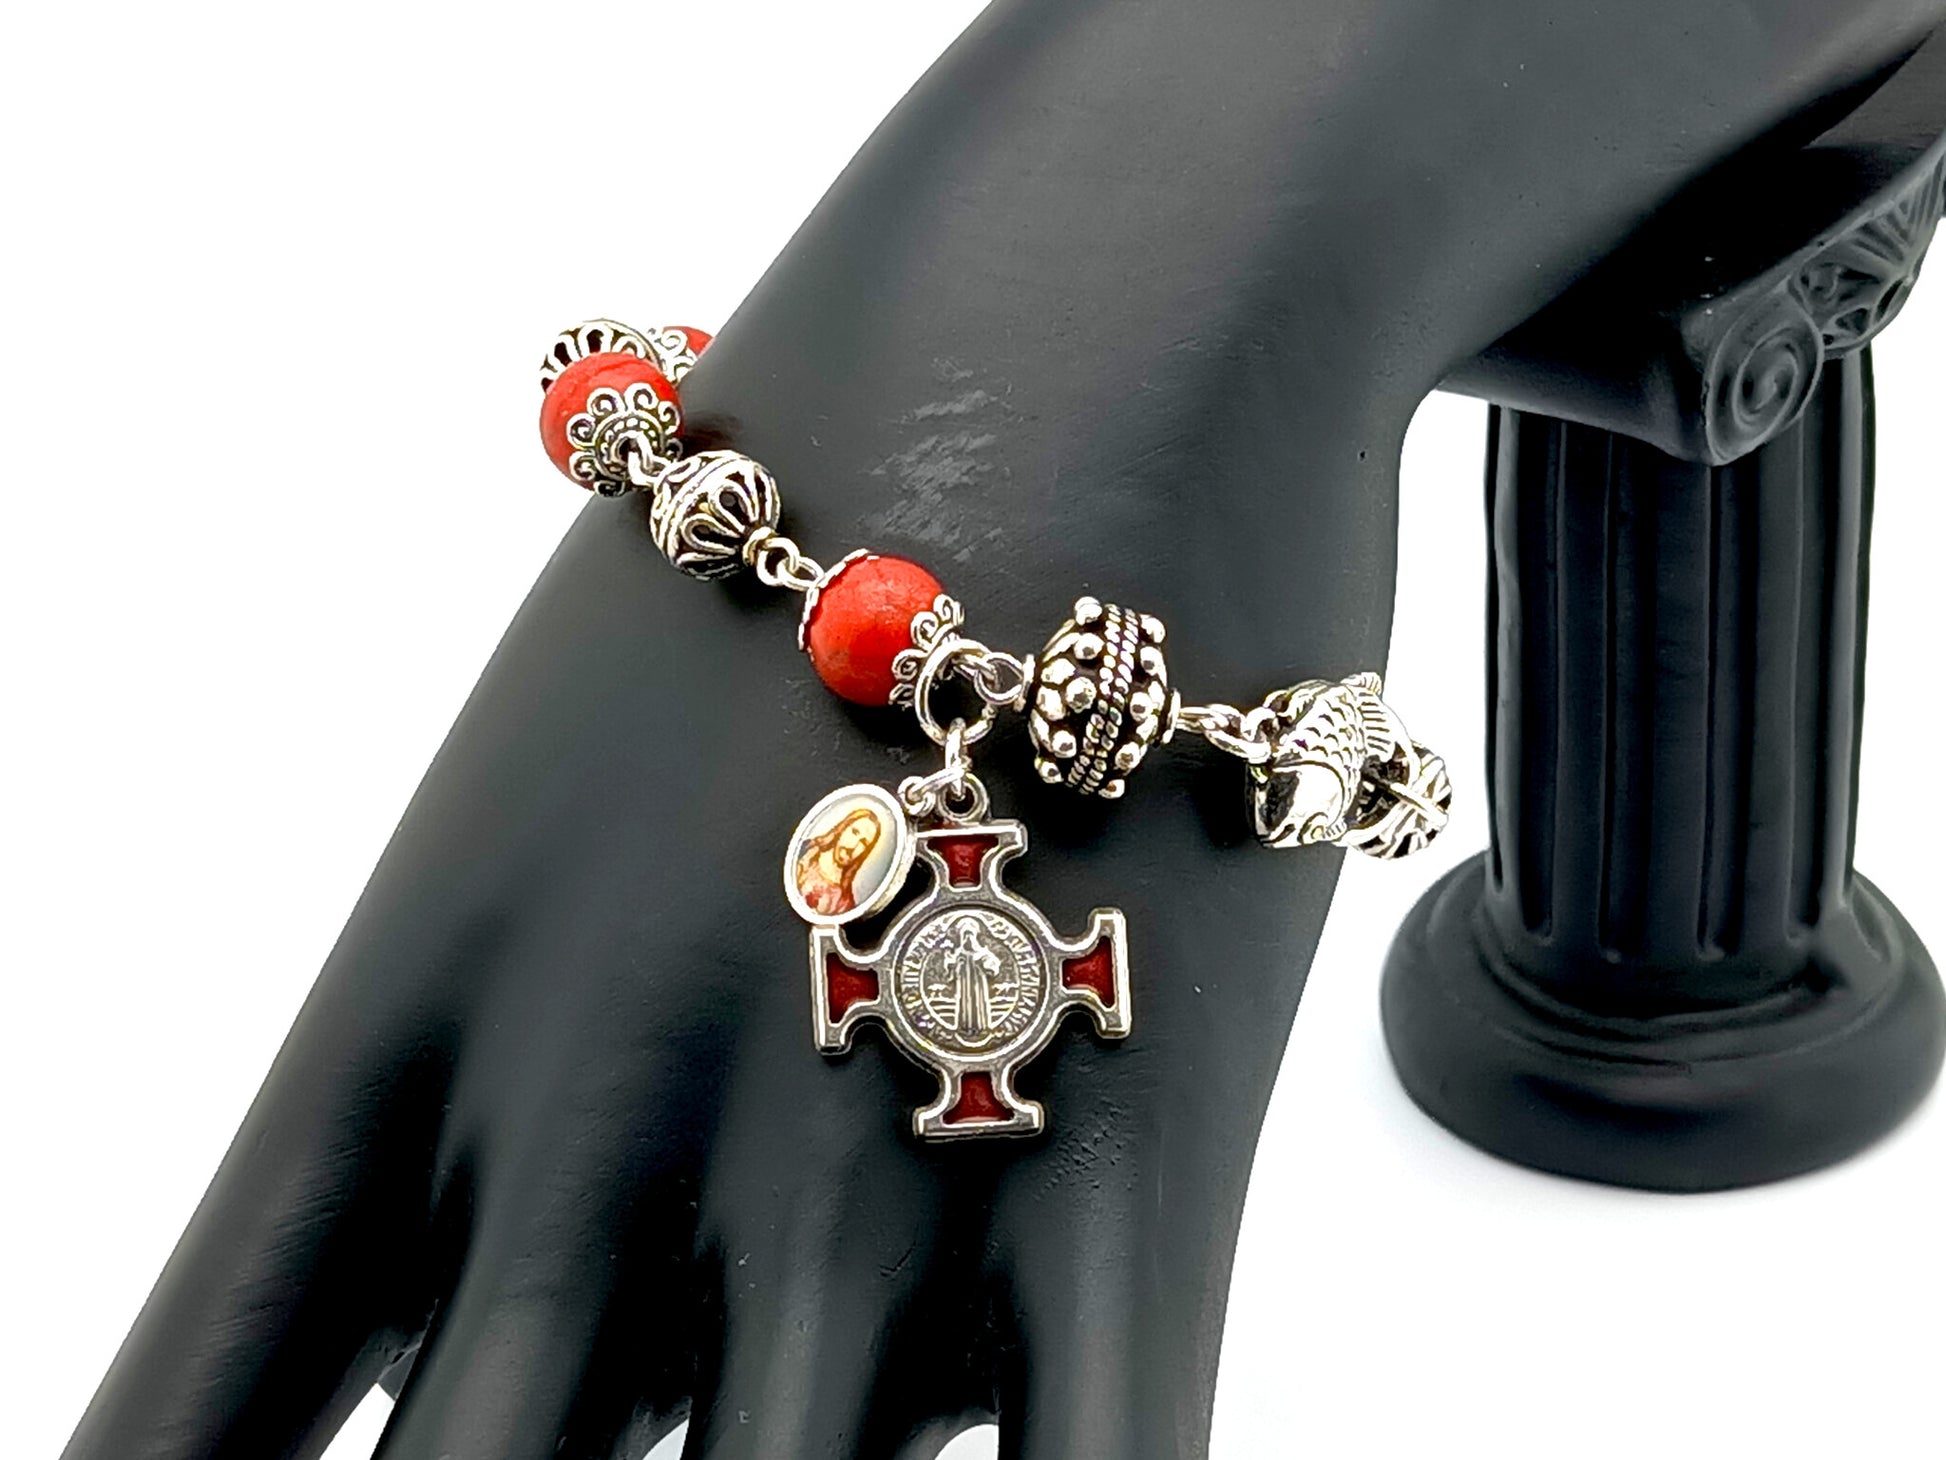 Saint Benedict unique rosary beads single decade rosary bracelet with red howlite and silver beads, red enamel cross and Sacred Heart medal.